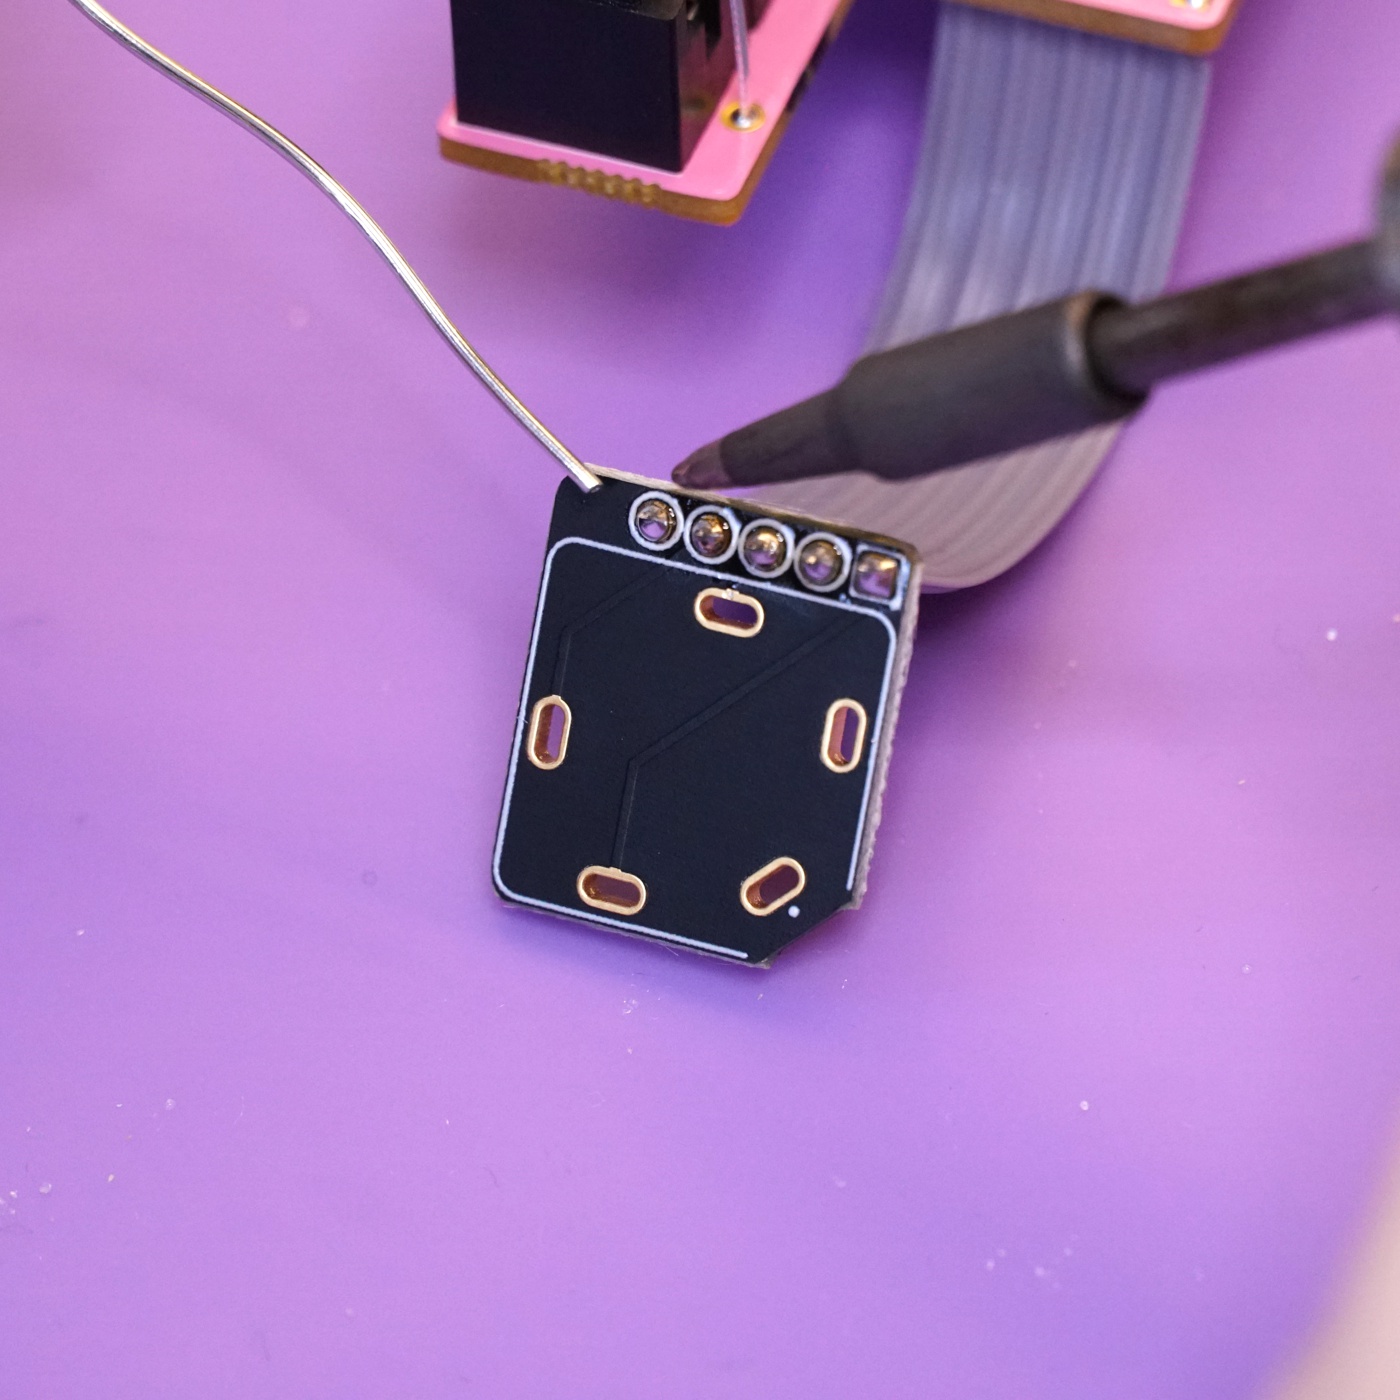 The five conductors of the flat flex cable soldered to the headphone breakout board